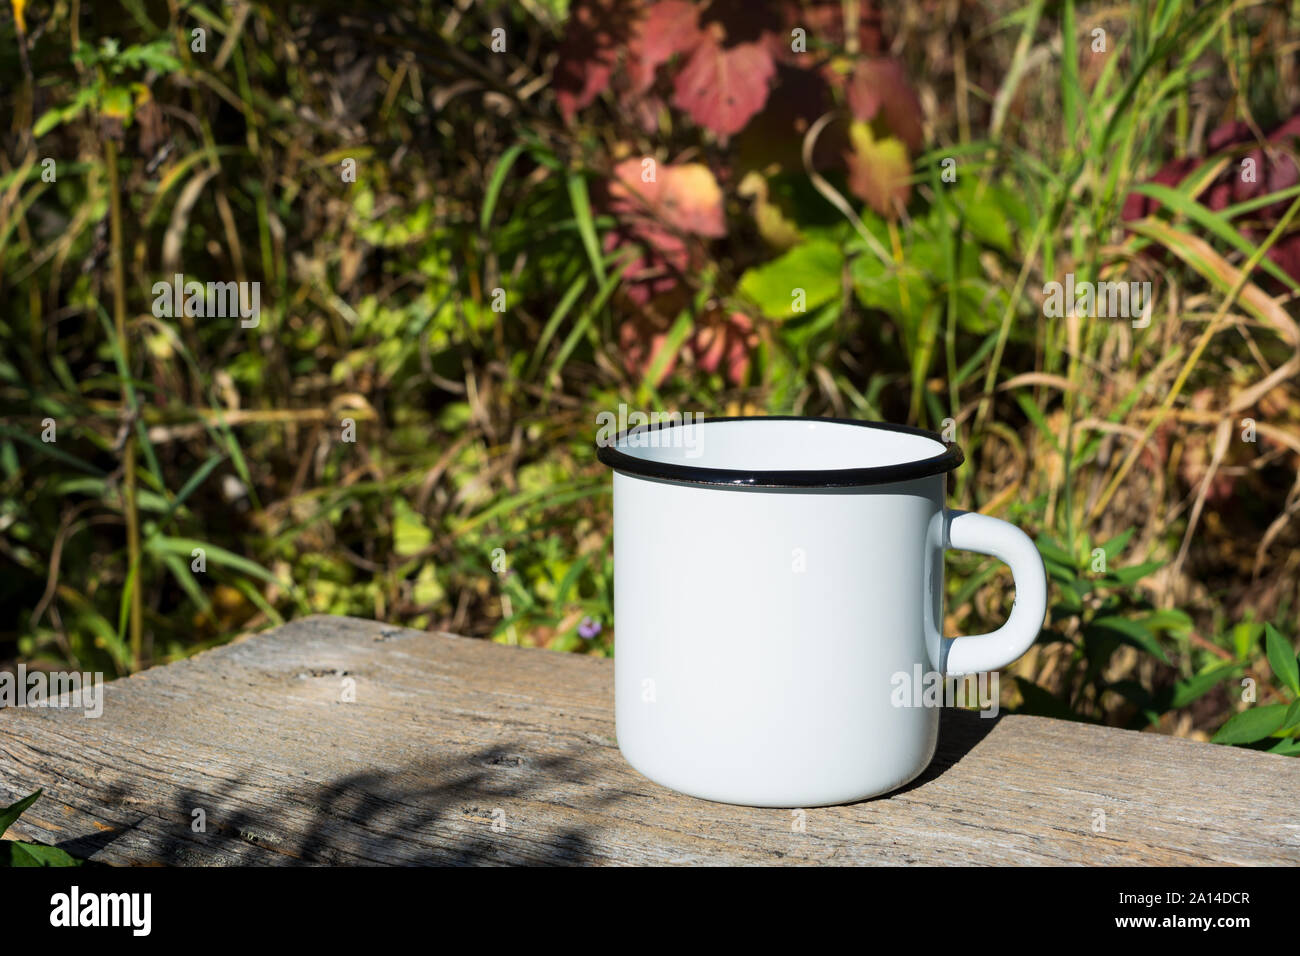 Download White Campfire Enamel Coffee Mug Mockup With Sun Beams And Grass Empty Mug Mock Up For Design Promotion Stock Photo Alamy